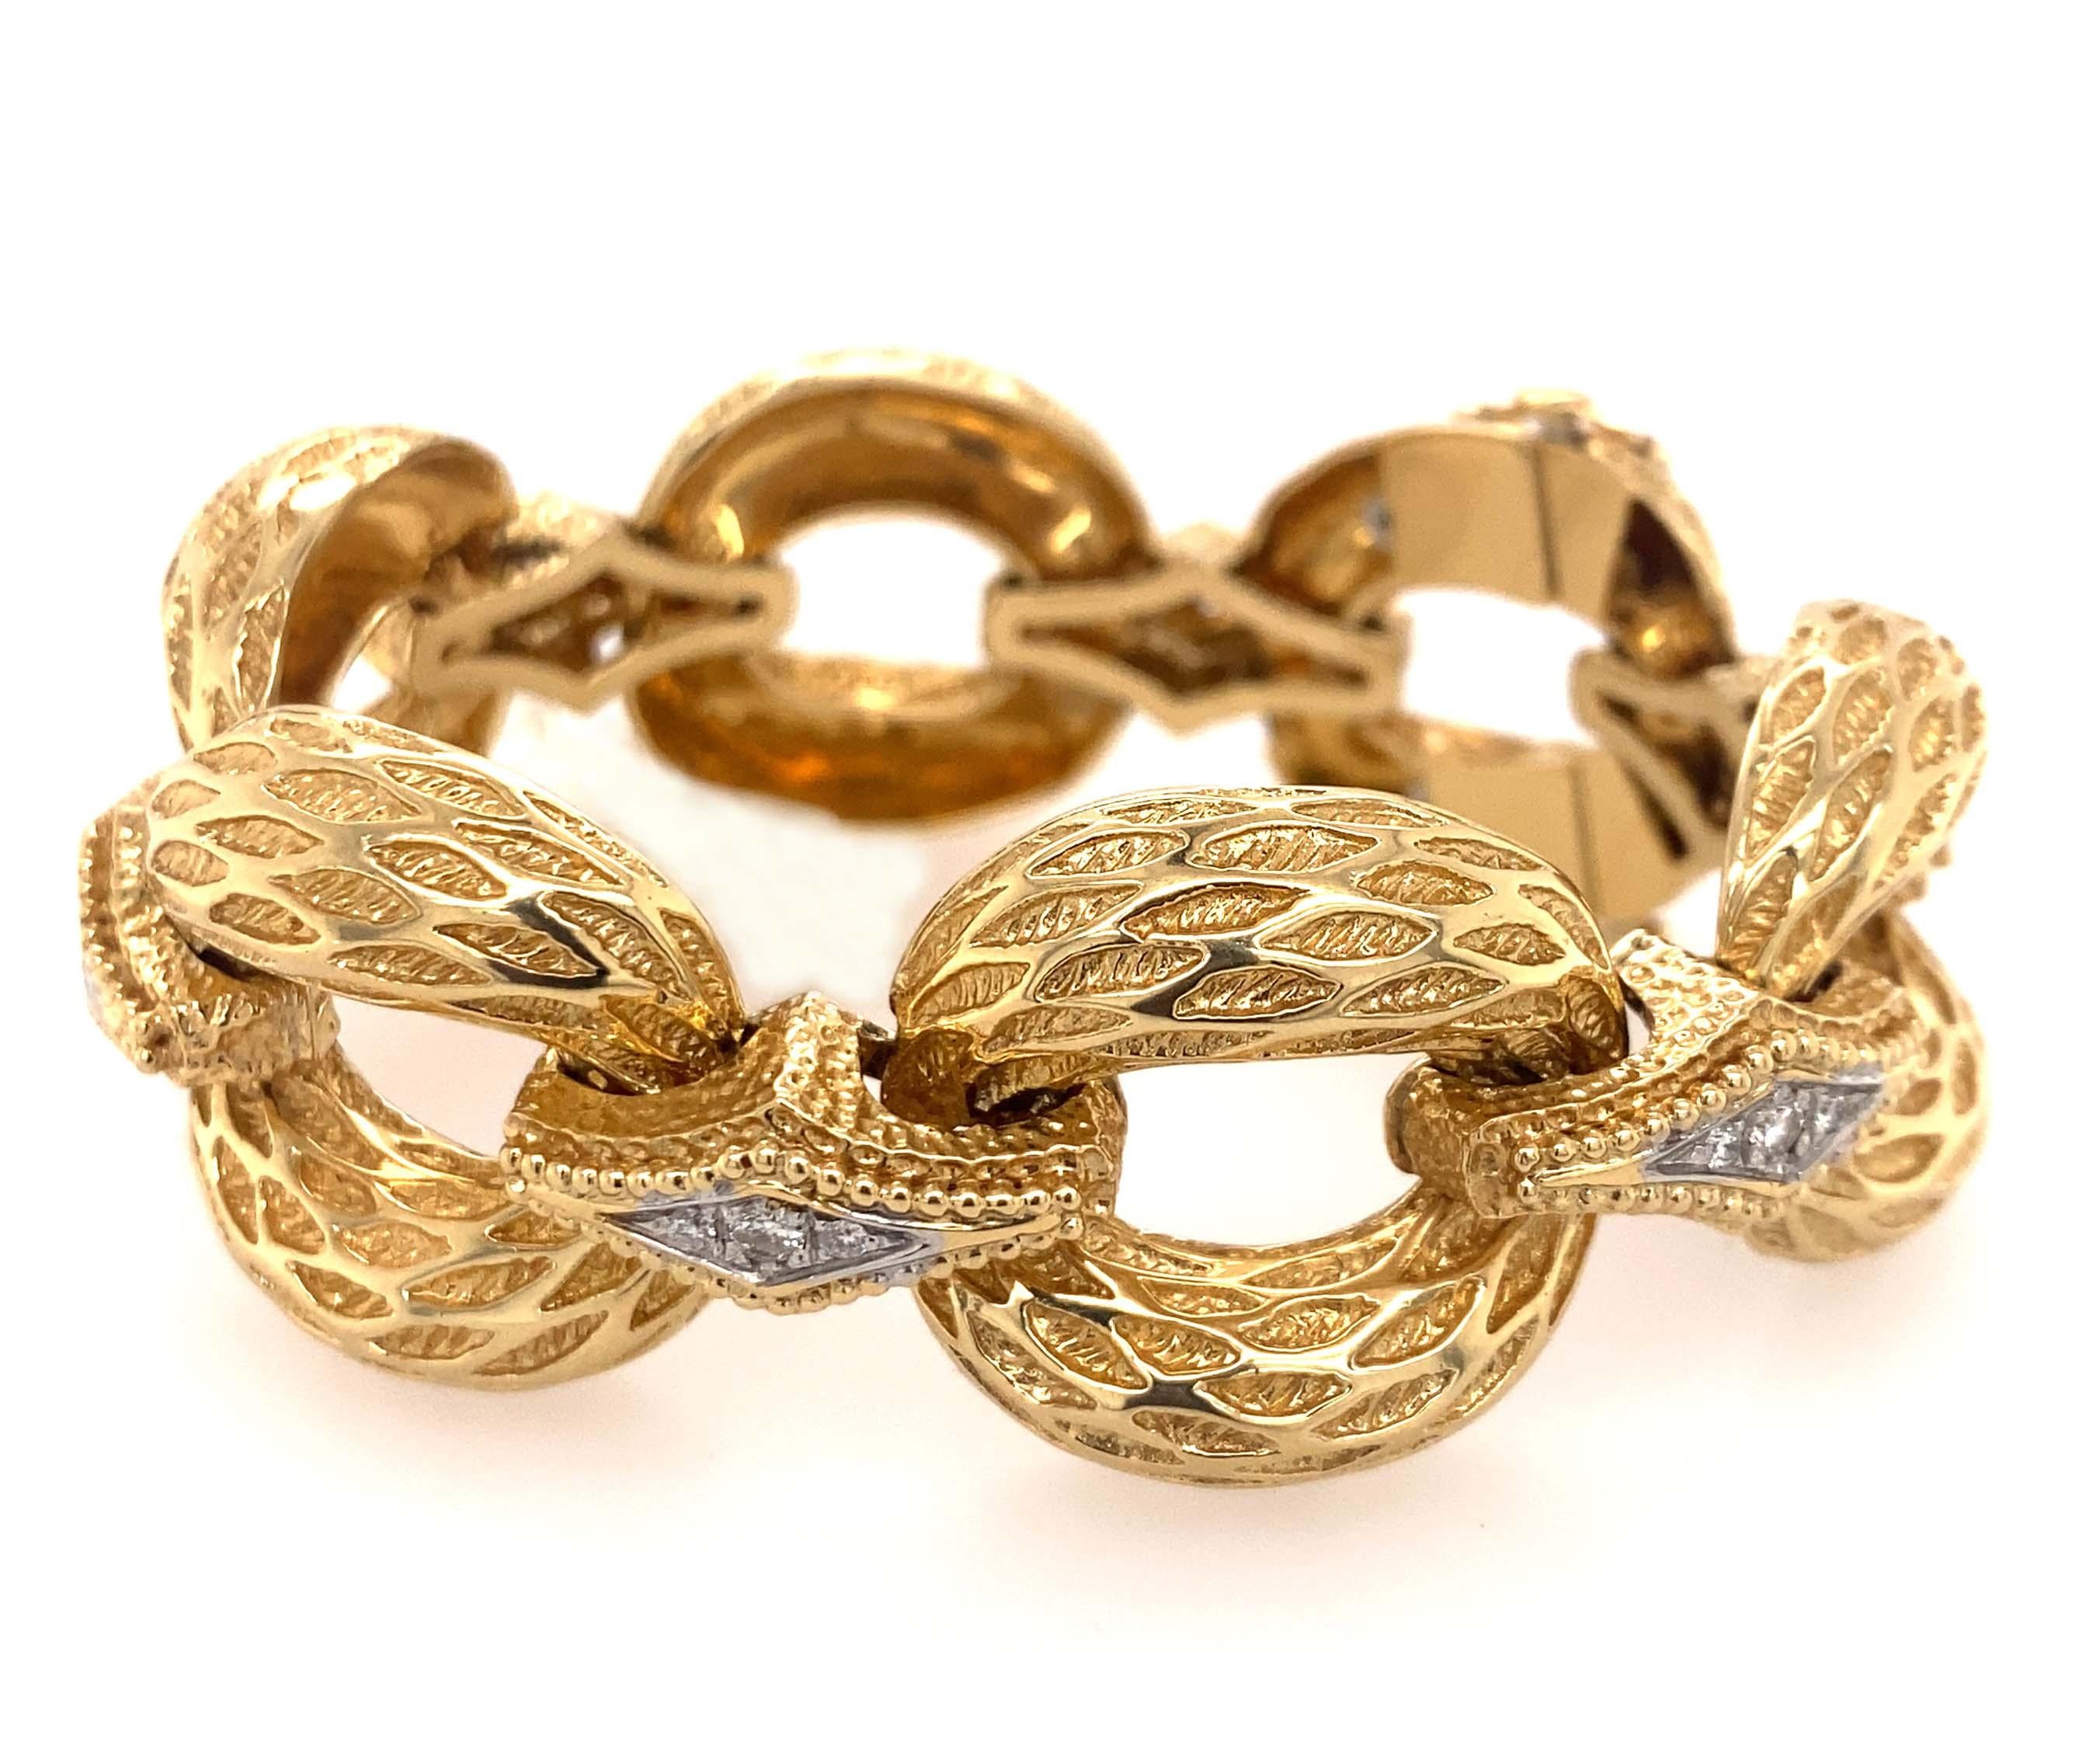 18k Gold and Diamond Link Bracelet .  Weight 66.6 dwt and measurement is  approximately 7 inches long x 1 inches wide. 